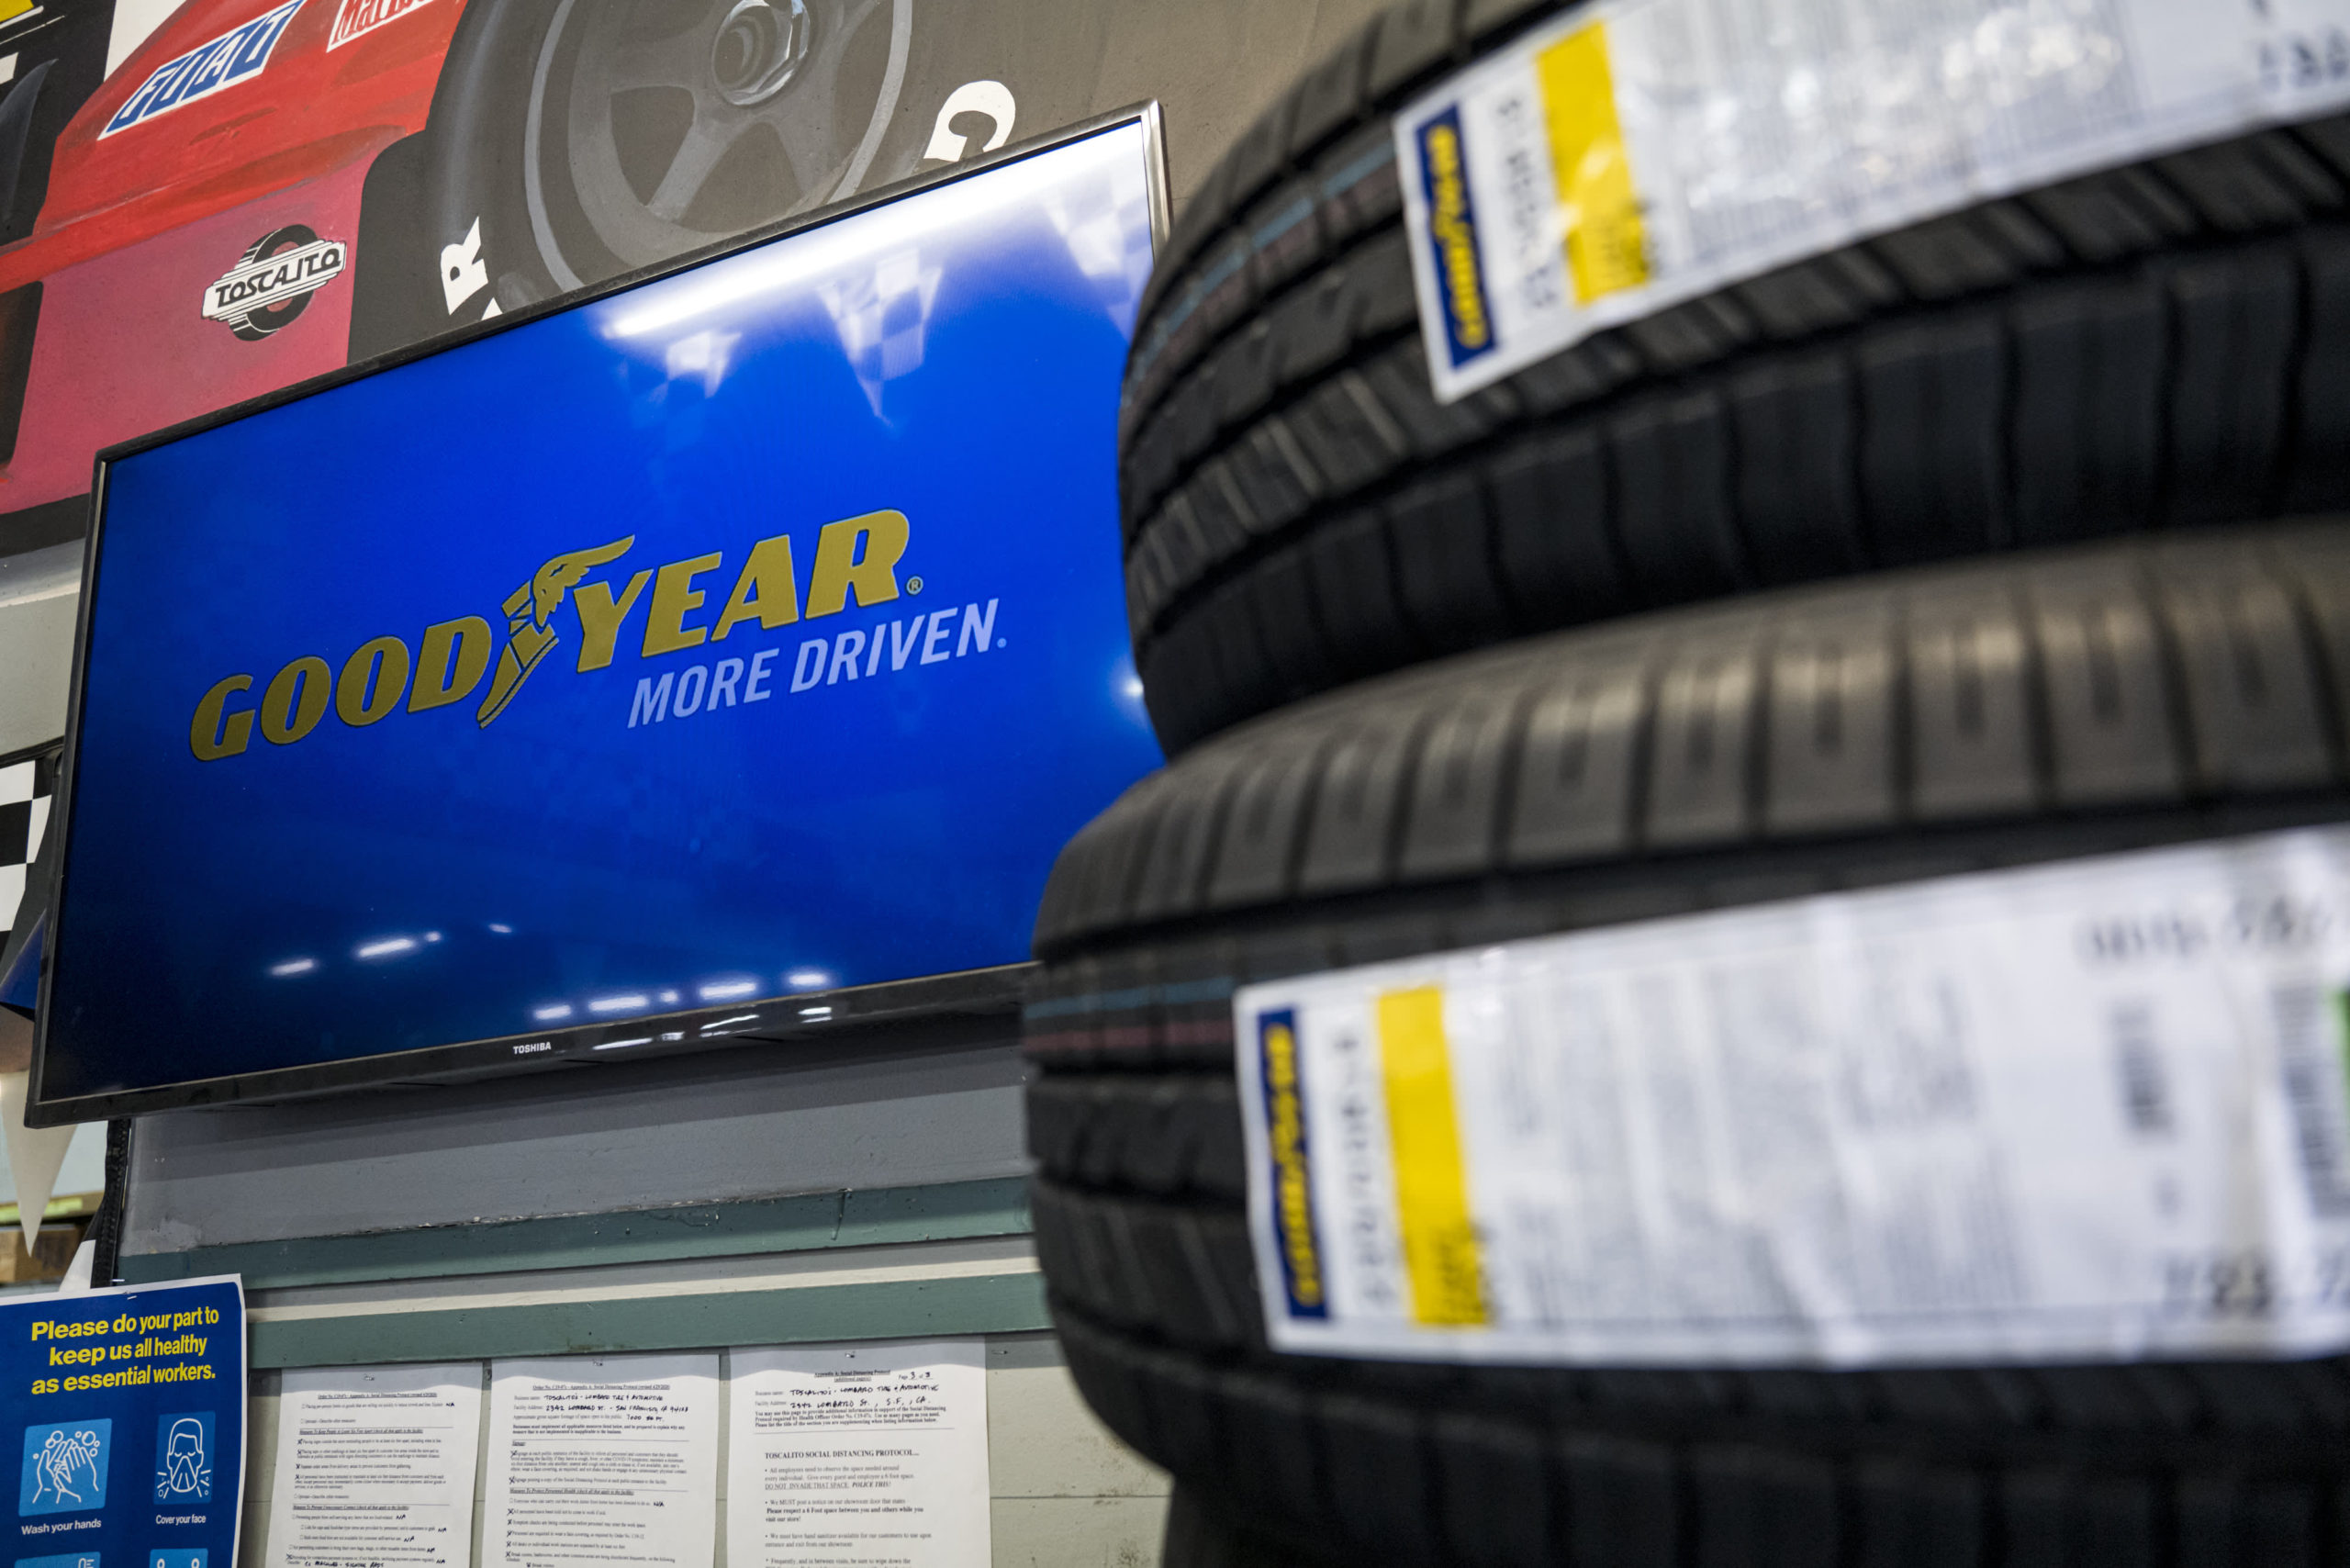 JPMorgan upgrades Goodyear Tire, forecasts stock can rebound 45% after massive sell-off